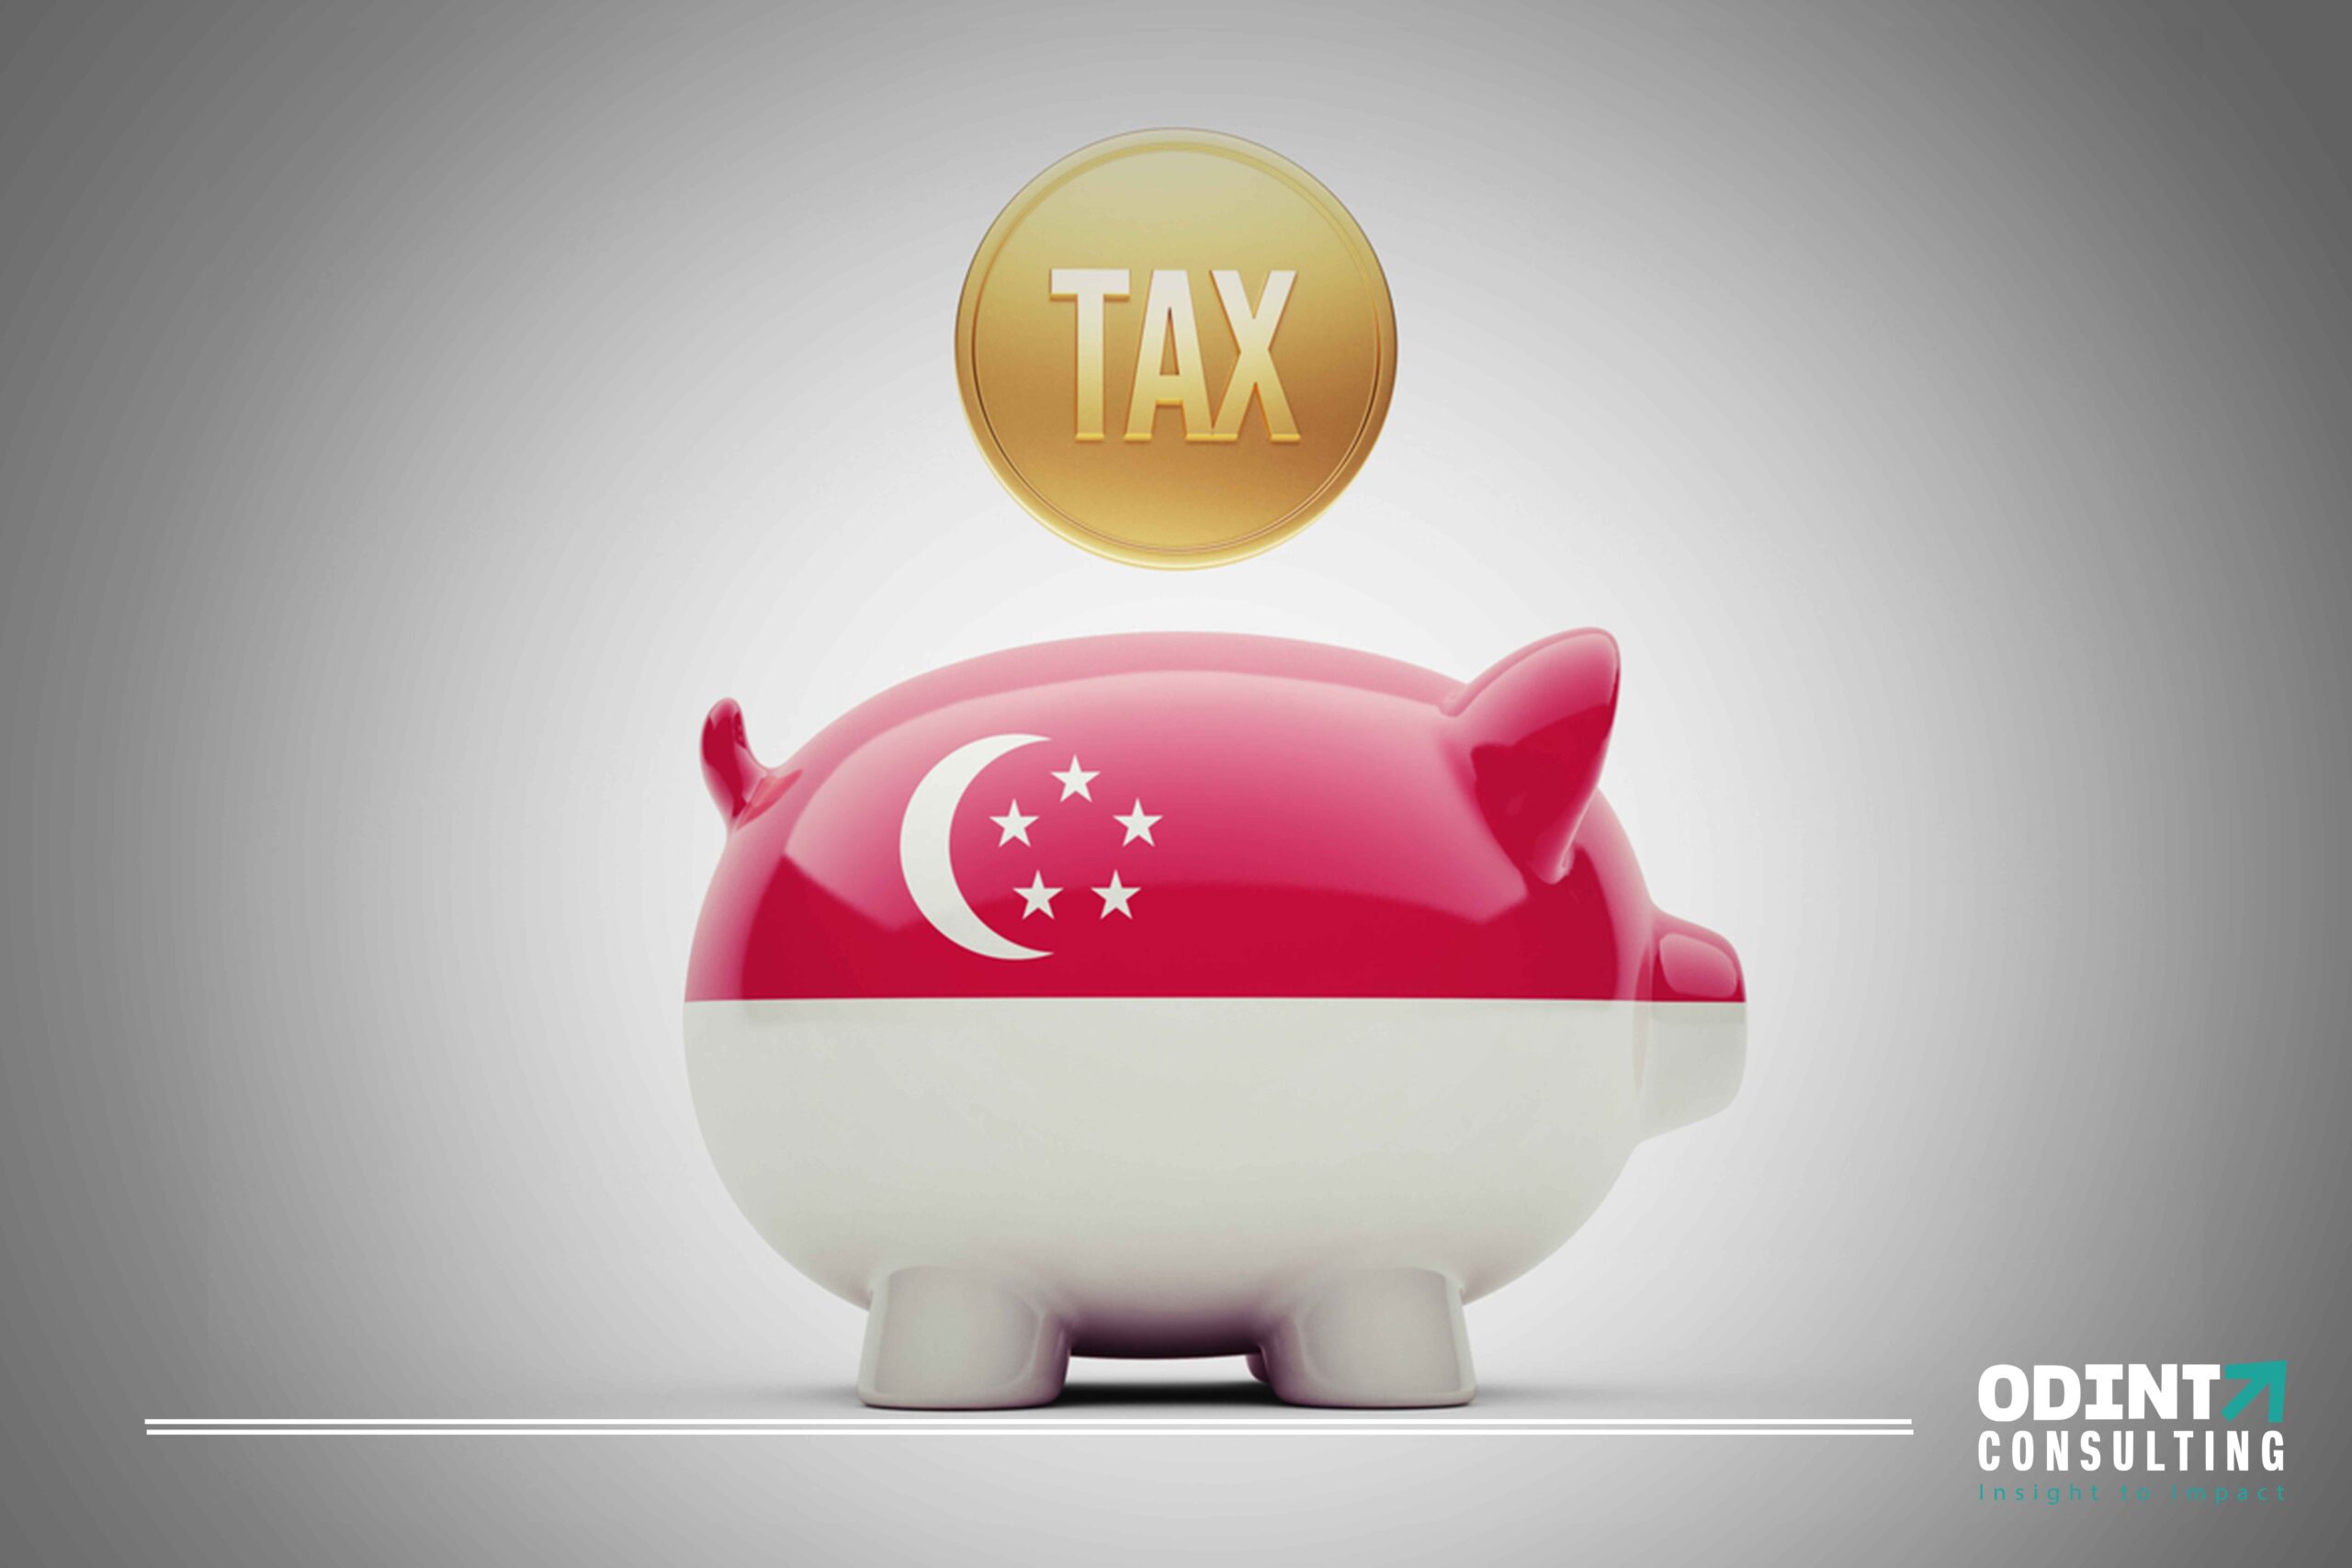 Personal income tax in Singapore